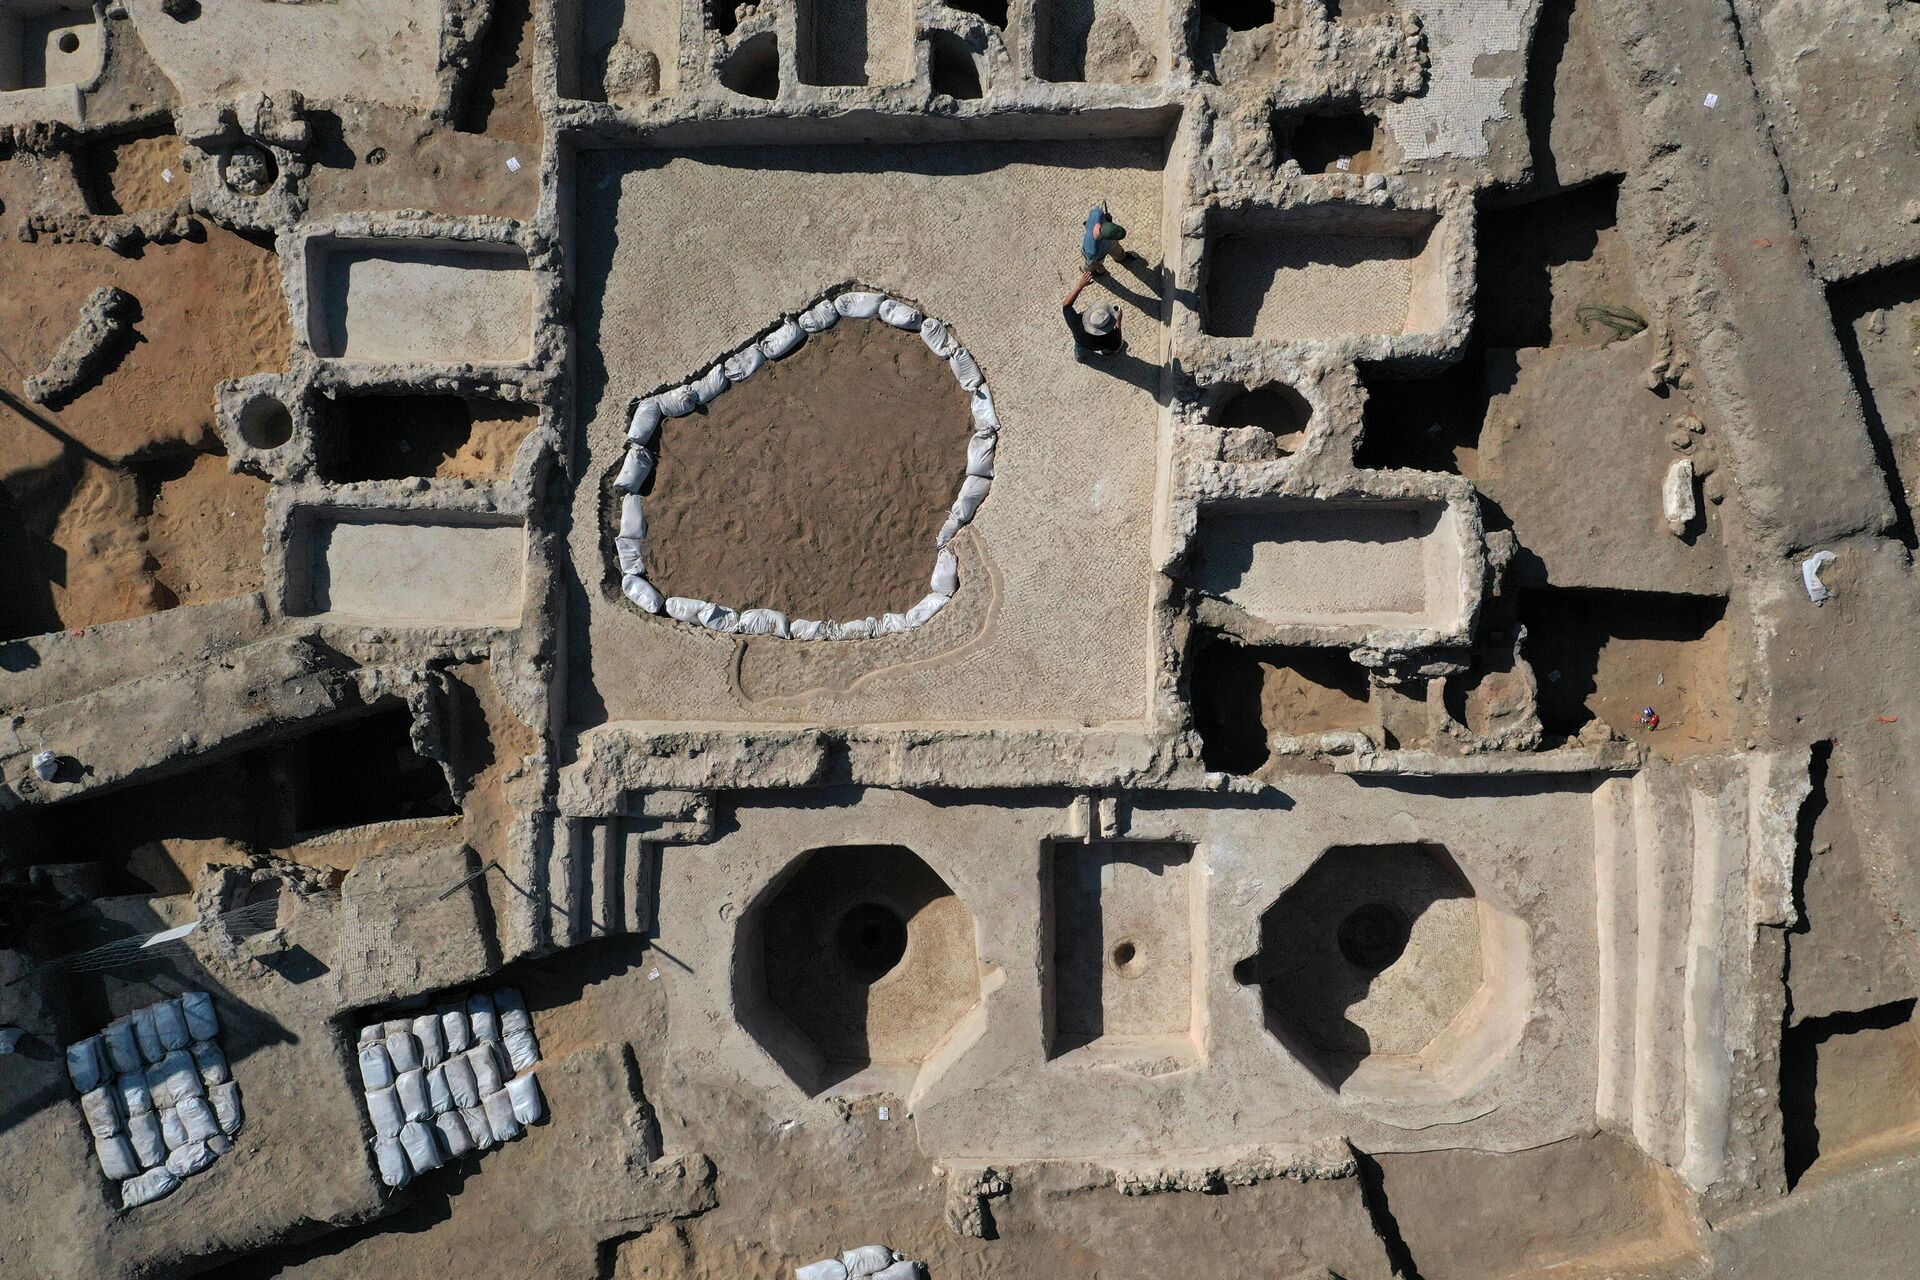 This picture taken on October 10, 2021 in Israel's central city of Yavne shows an aerial view of a winepress at the Tel Yavne excavation site, where a massive wine production facility was discovered, the largest such complex of winepresses known from the Byzantine Period. - Sputnik International, 1920, 12.10.2021